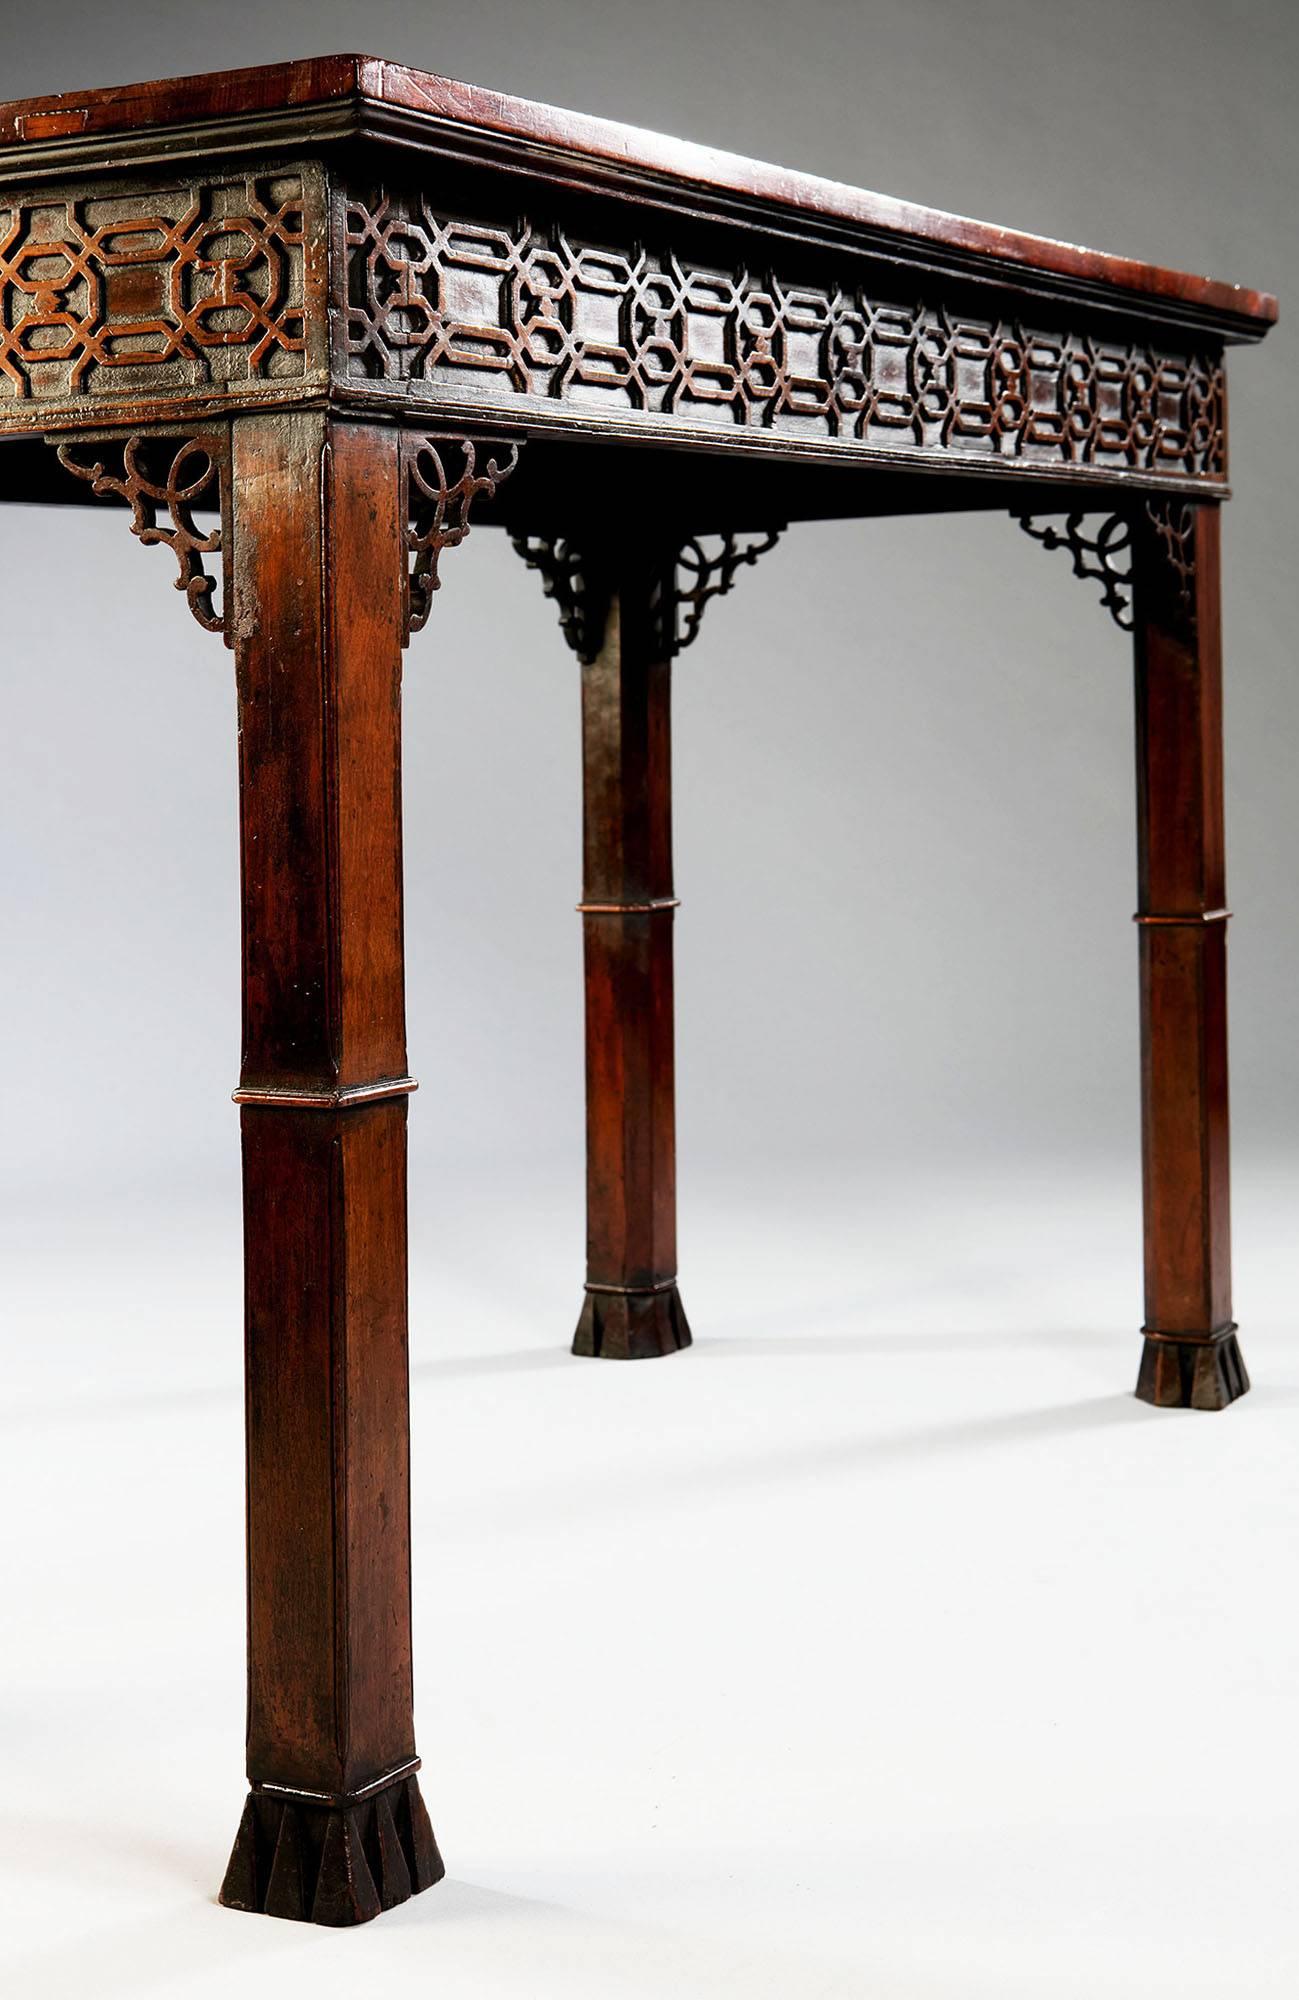 England, circa 1770 A fine 18th-century mahogany centre table, the later marble top above a chinoiserie blind fretwork frieze finished on all sides and raised on square chamfered legs with pierced spandrels and fabulous geometric block feet made up